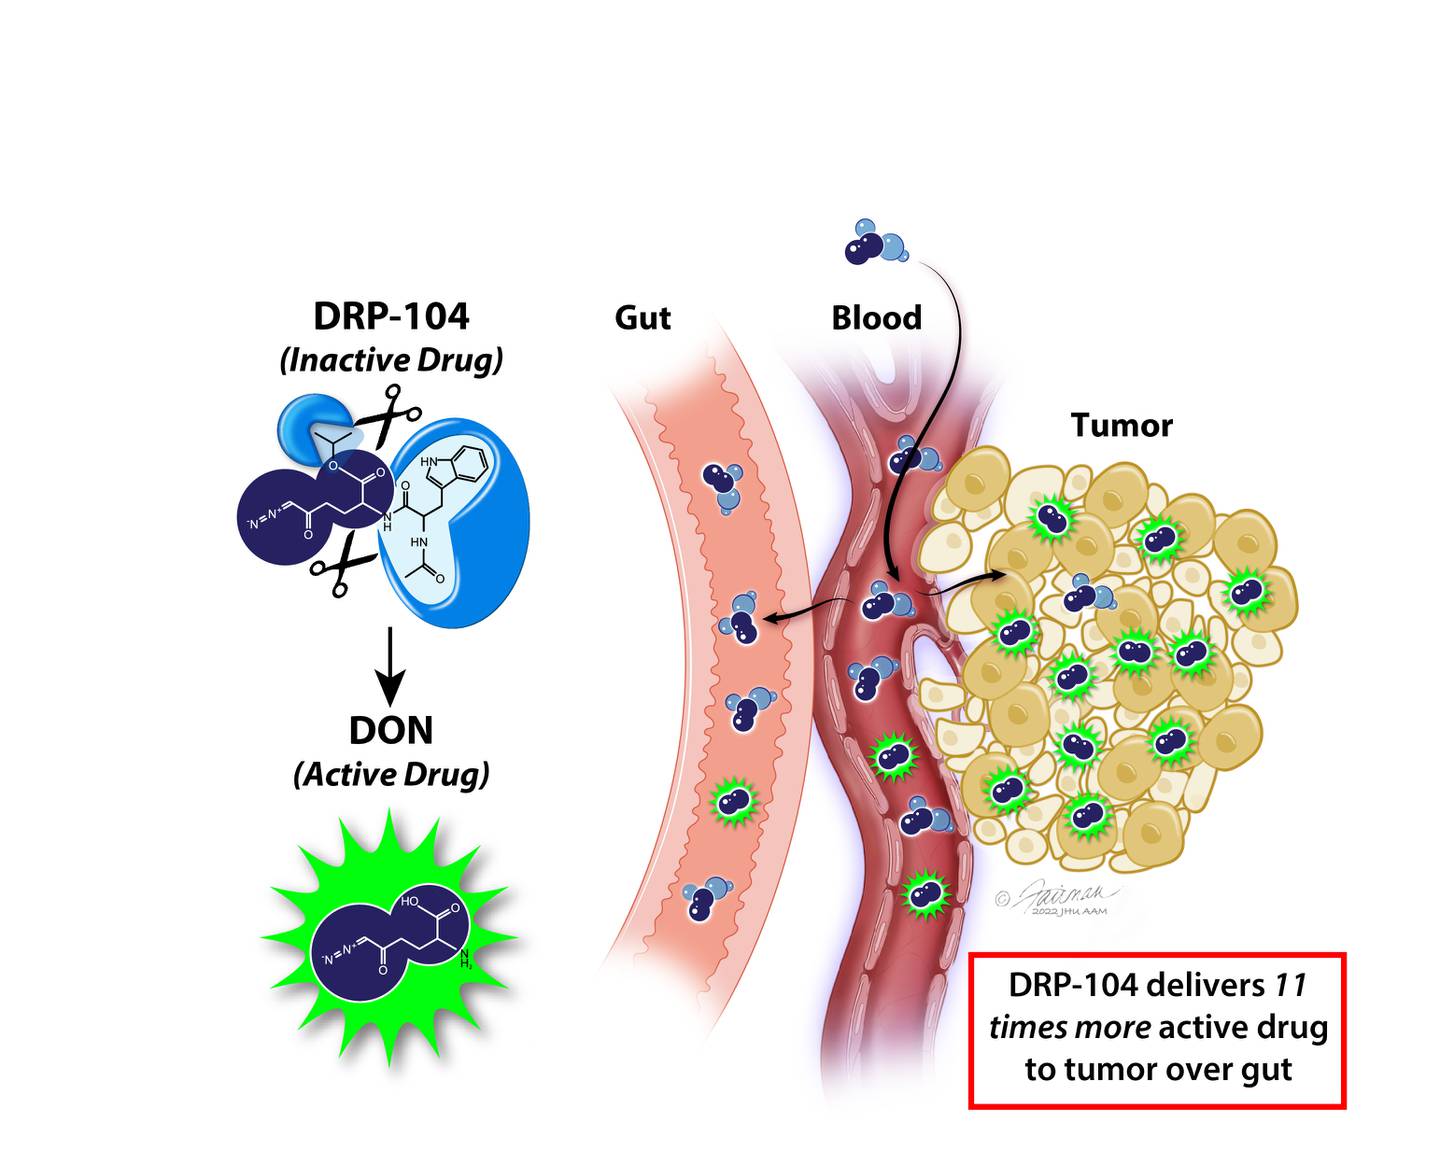 Johns Hopkins scientist modified an old cancer drug (DON) that was too toxic for the human body. Mouse studies show their new version (DRP-104) delivers 11 times more drug to the tumor than the gut, killing cancer but sparing the gut.